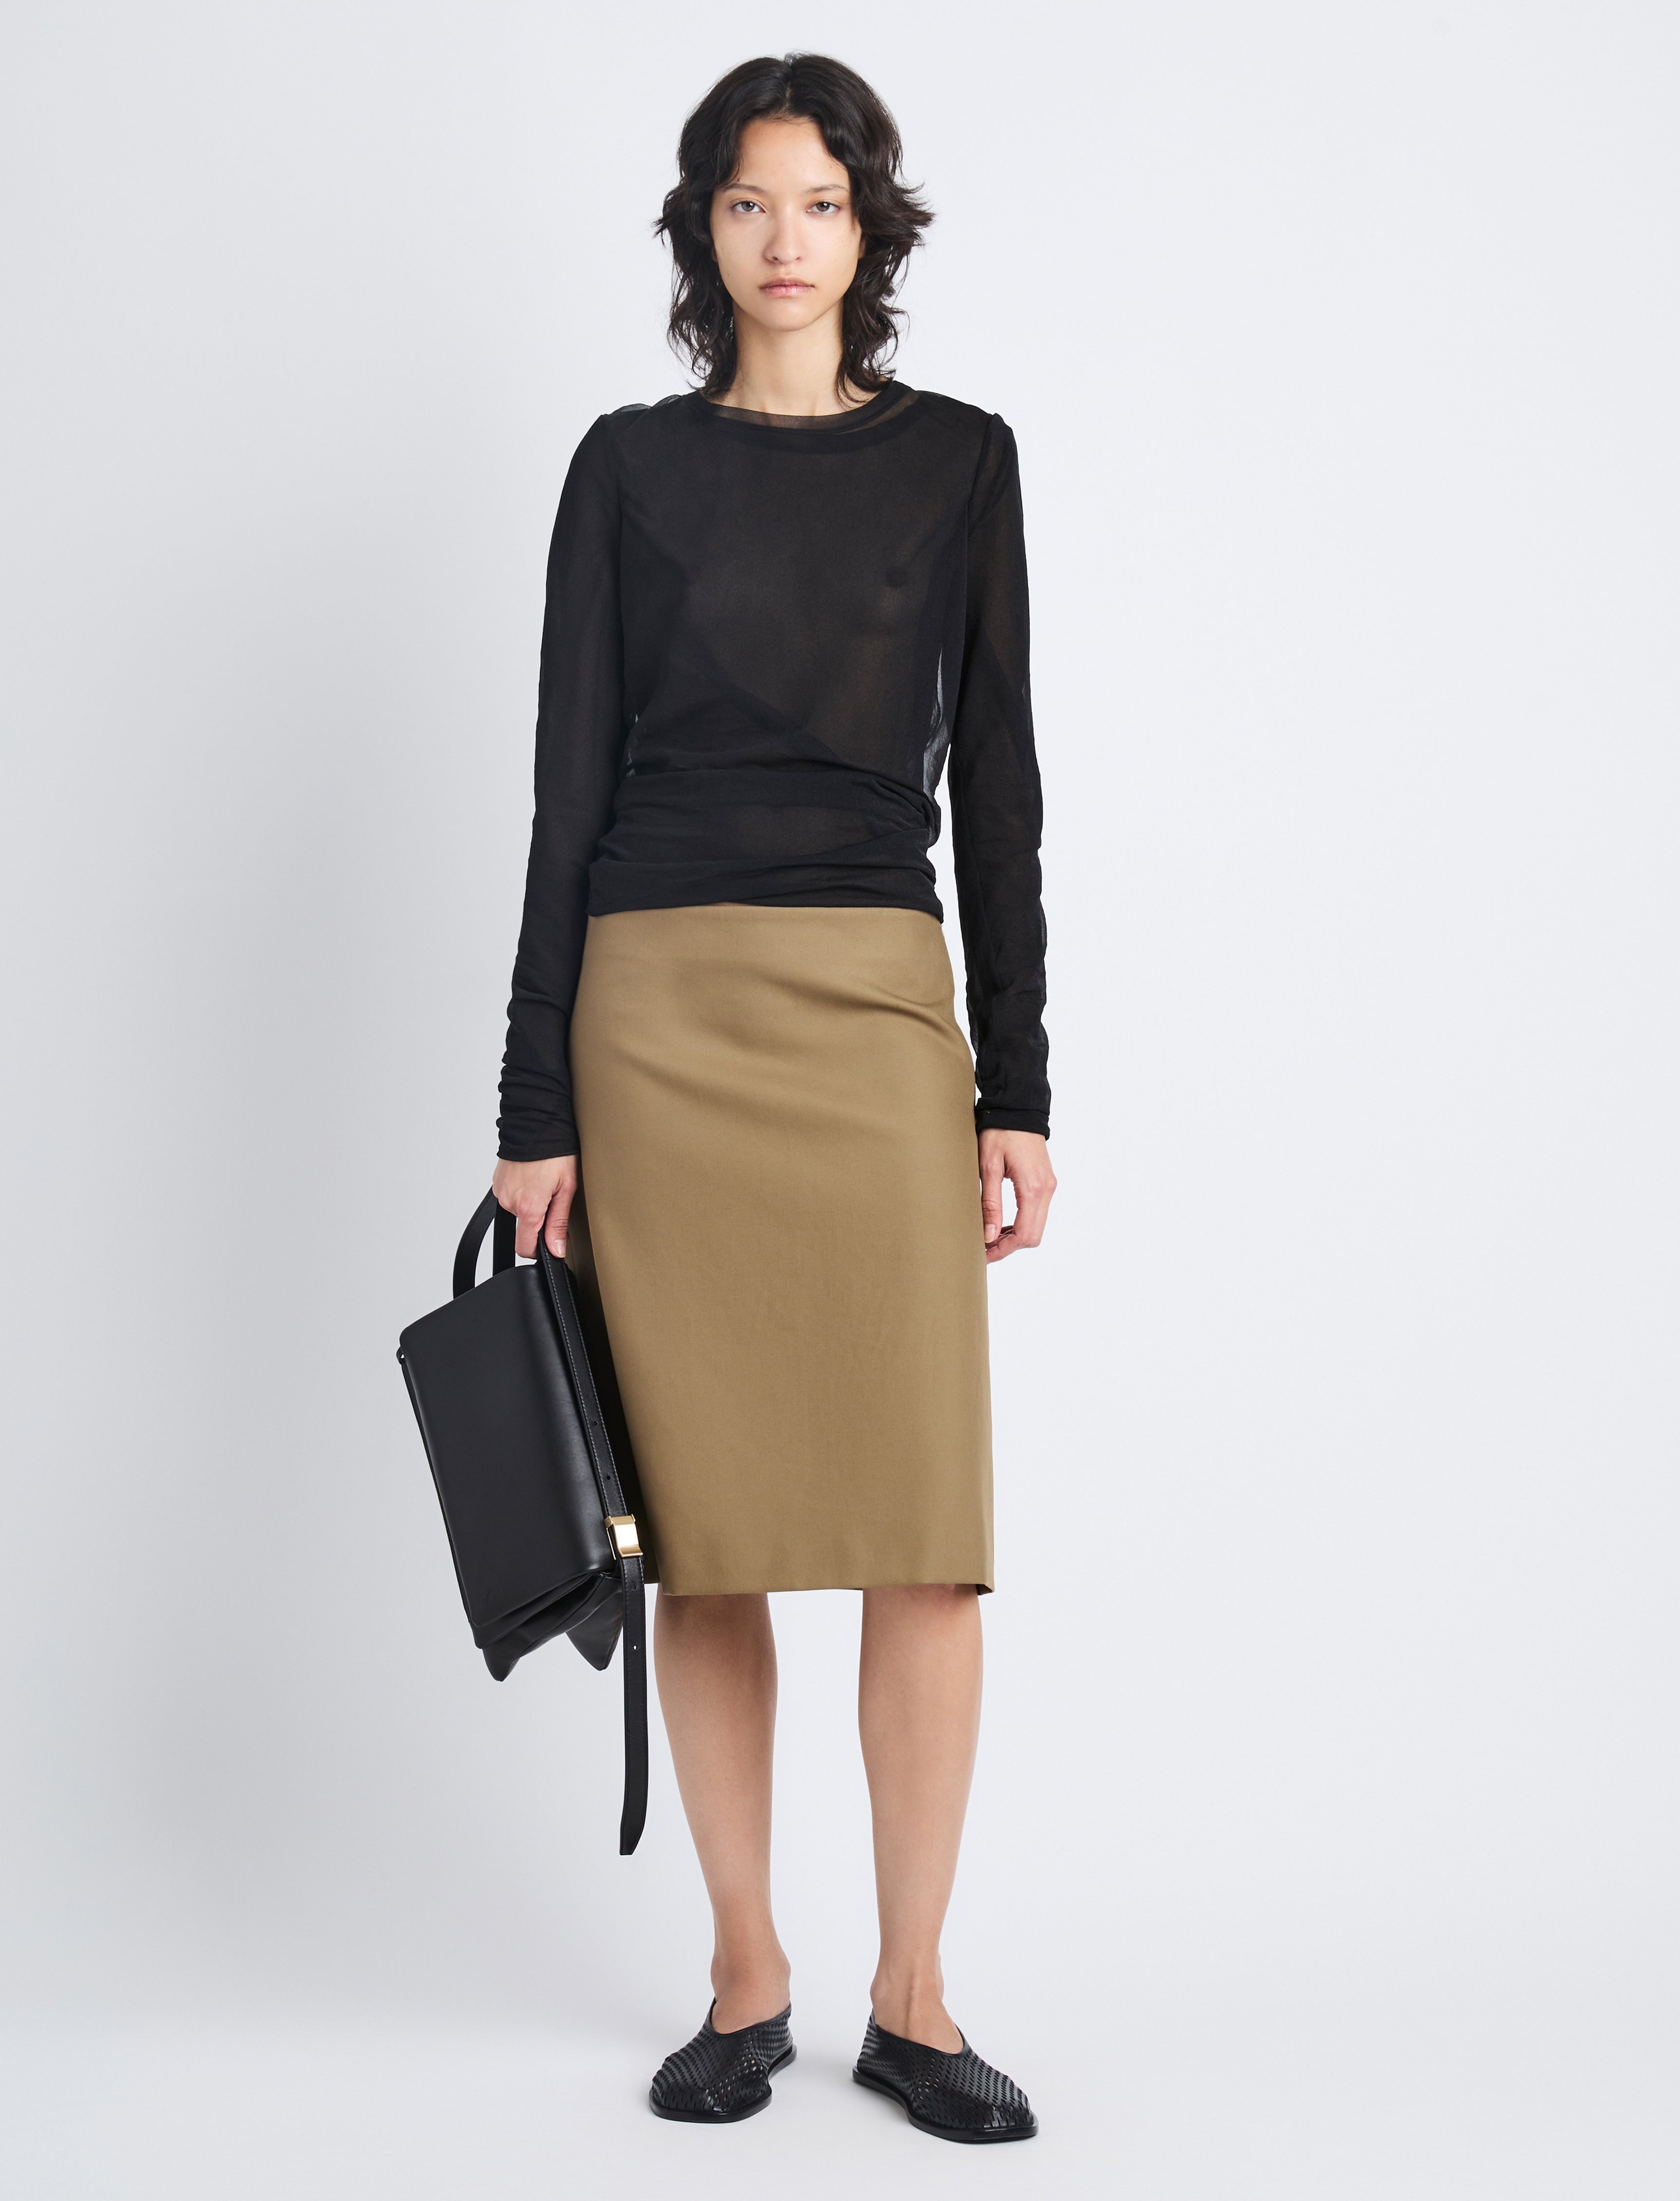 Adele Skirt in Eco Cotton Twill - 2